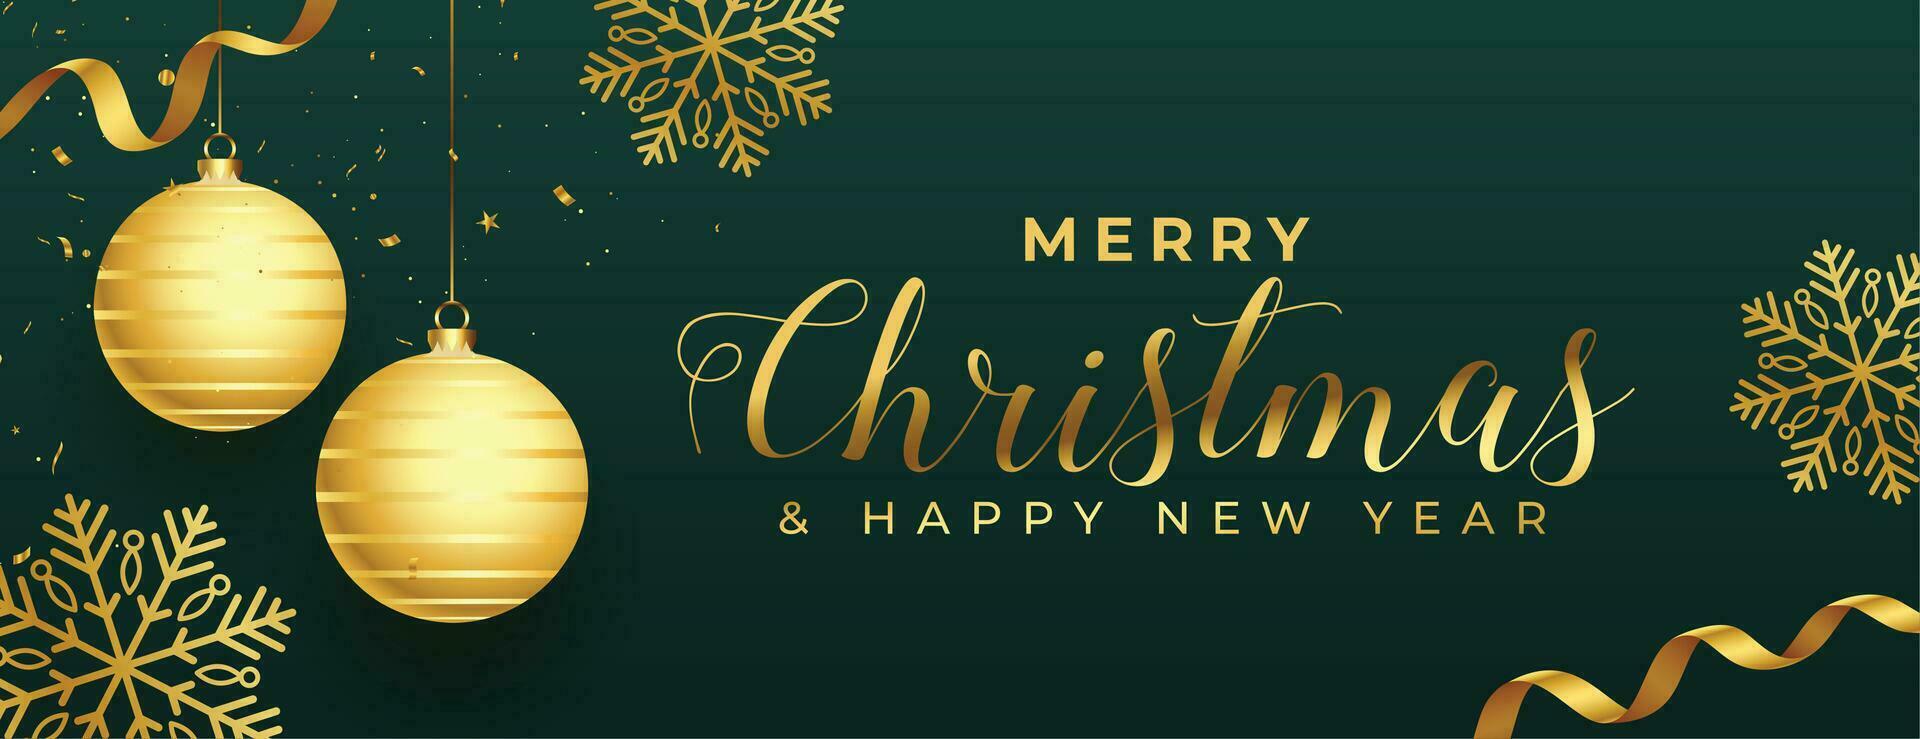 lovely golden merry christmas and new year banner with realistic elements vector